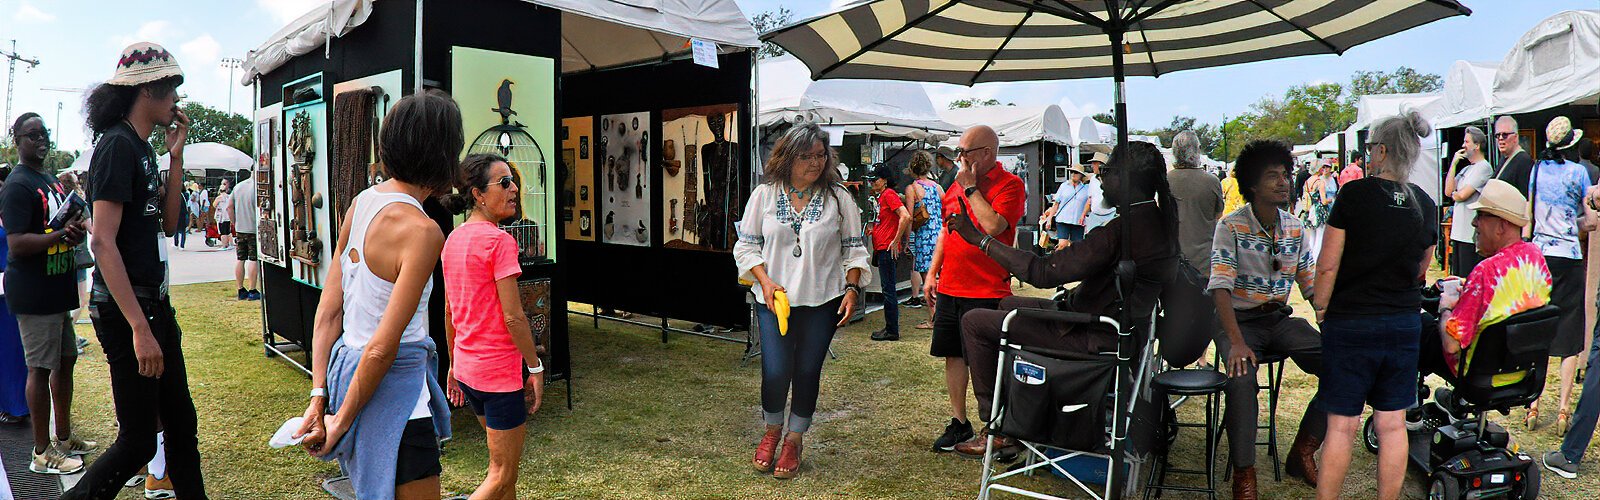 Festival goers interact with artist Athlone Clarke, seated in front of his booth. Athlone's motto is “Art saves lives” and his work of 25 years is collected both nationally and internationally.